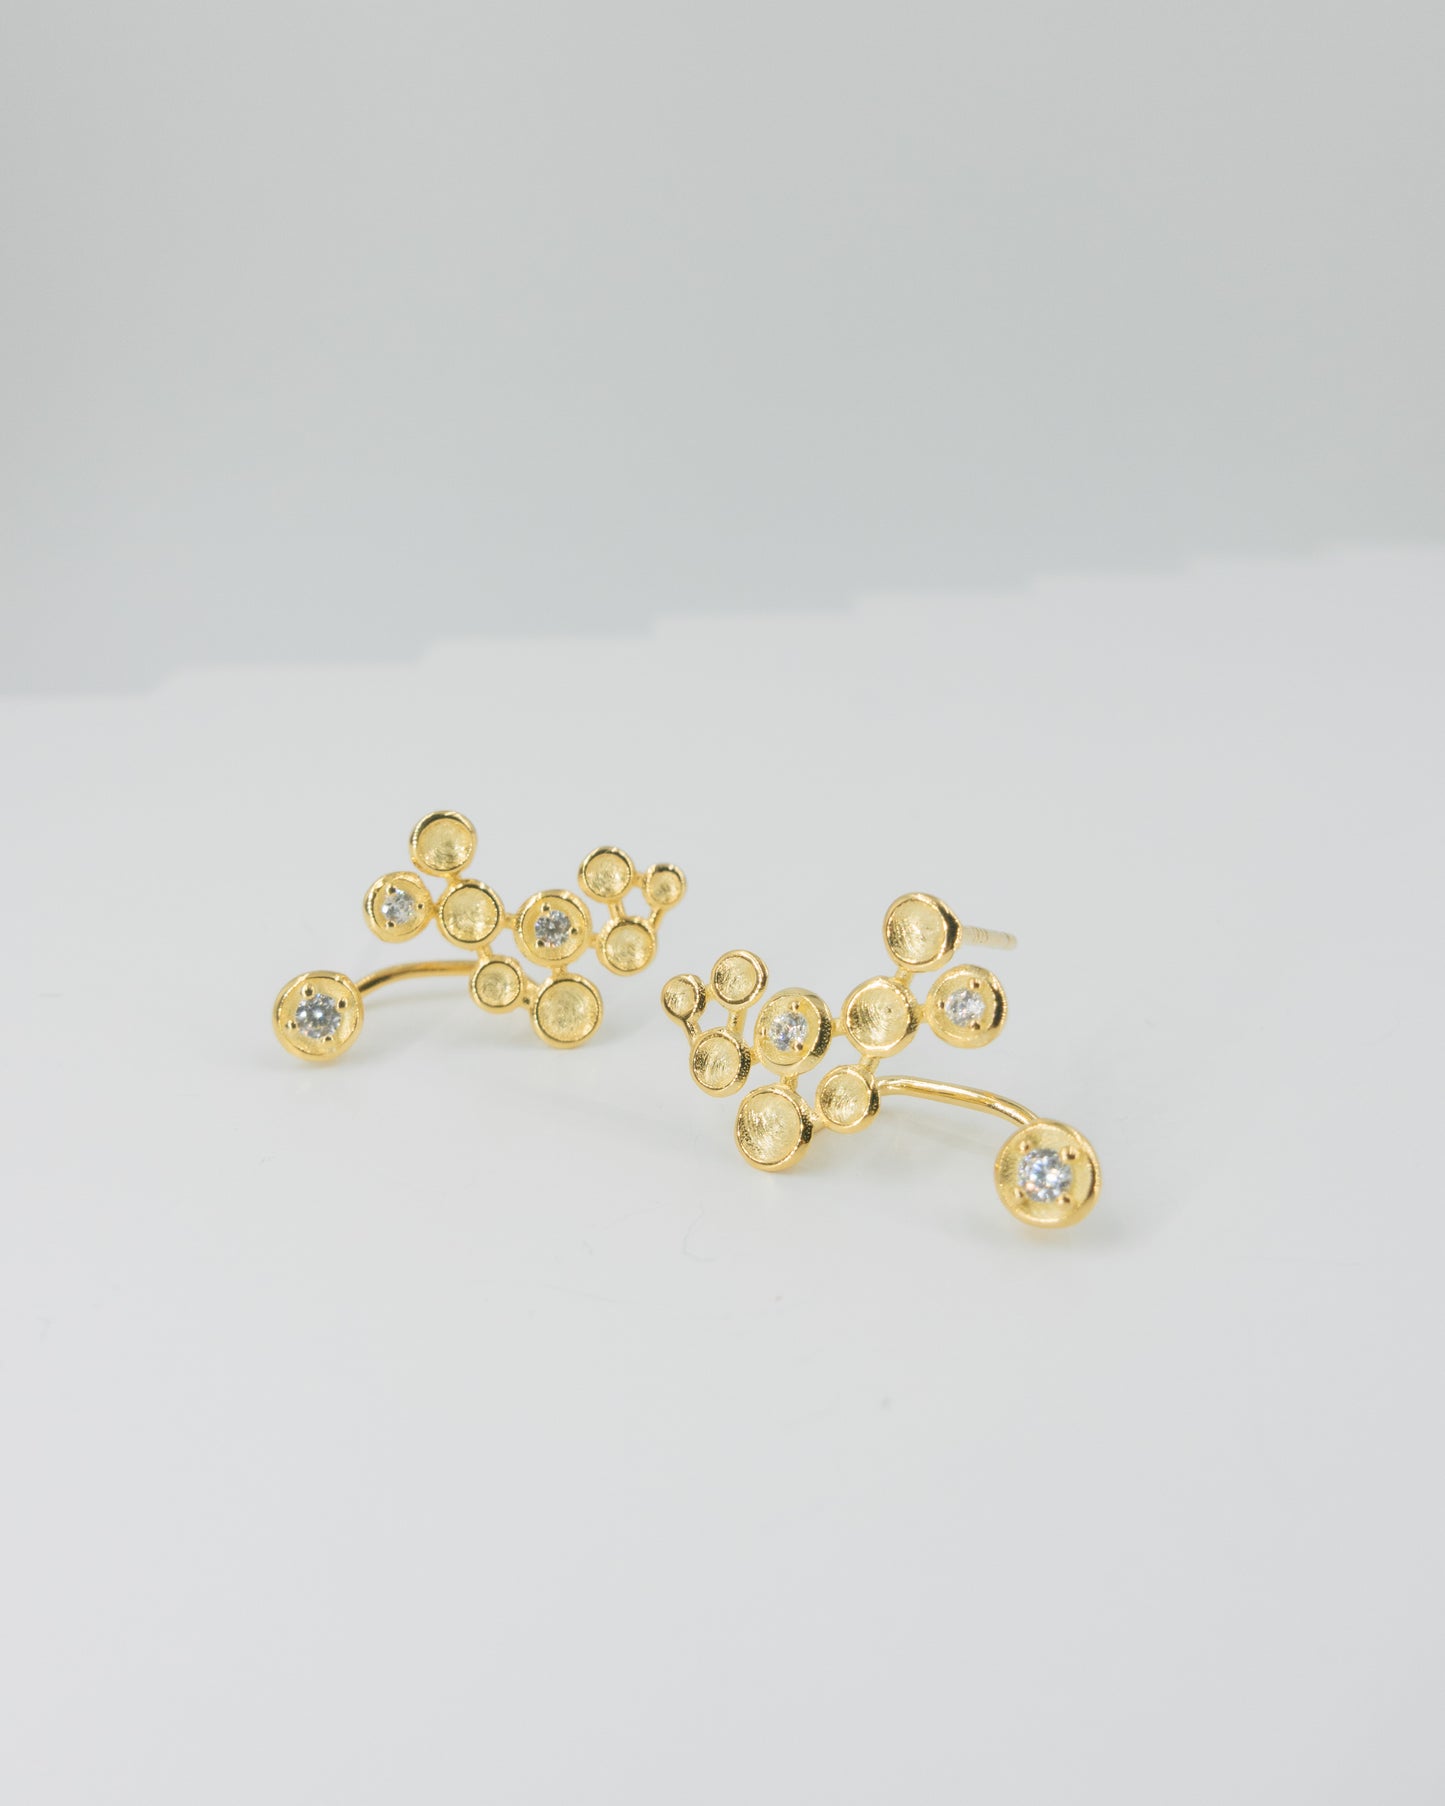 Floating Gold Speckled Earrings